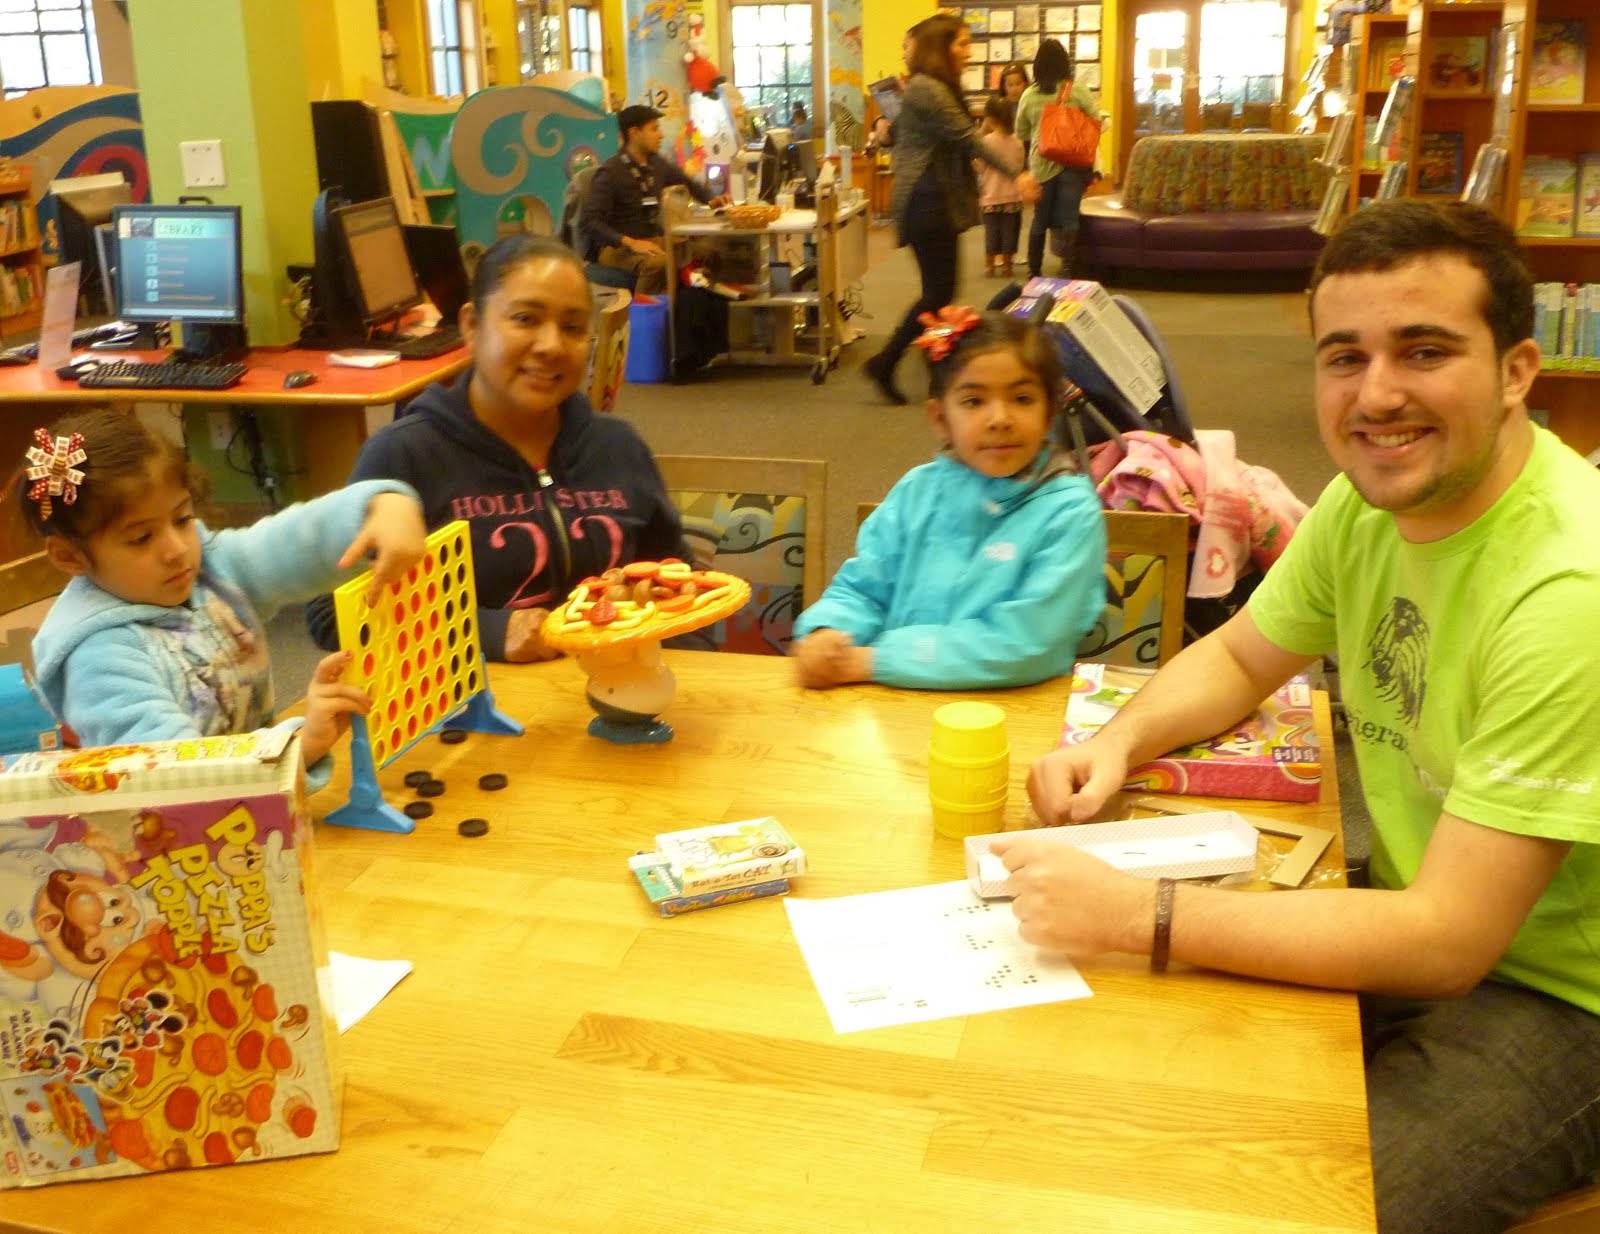 Board Game Day at the Library - Dec. 23, 2015